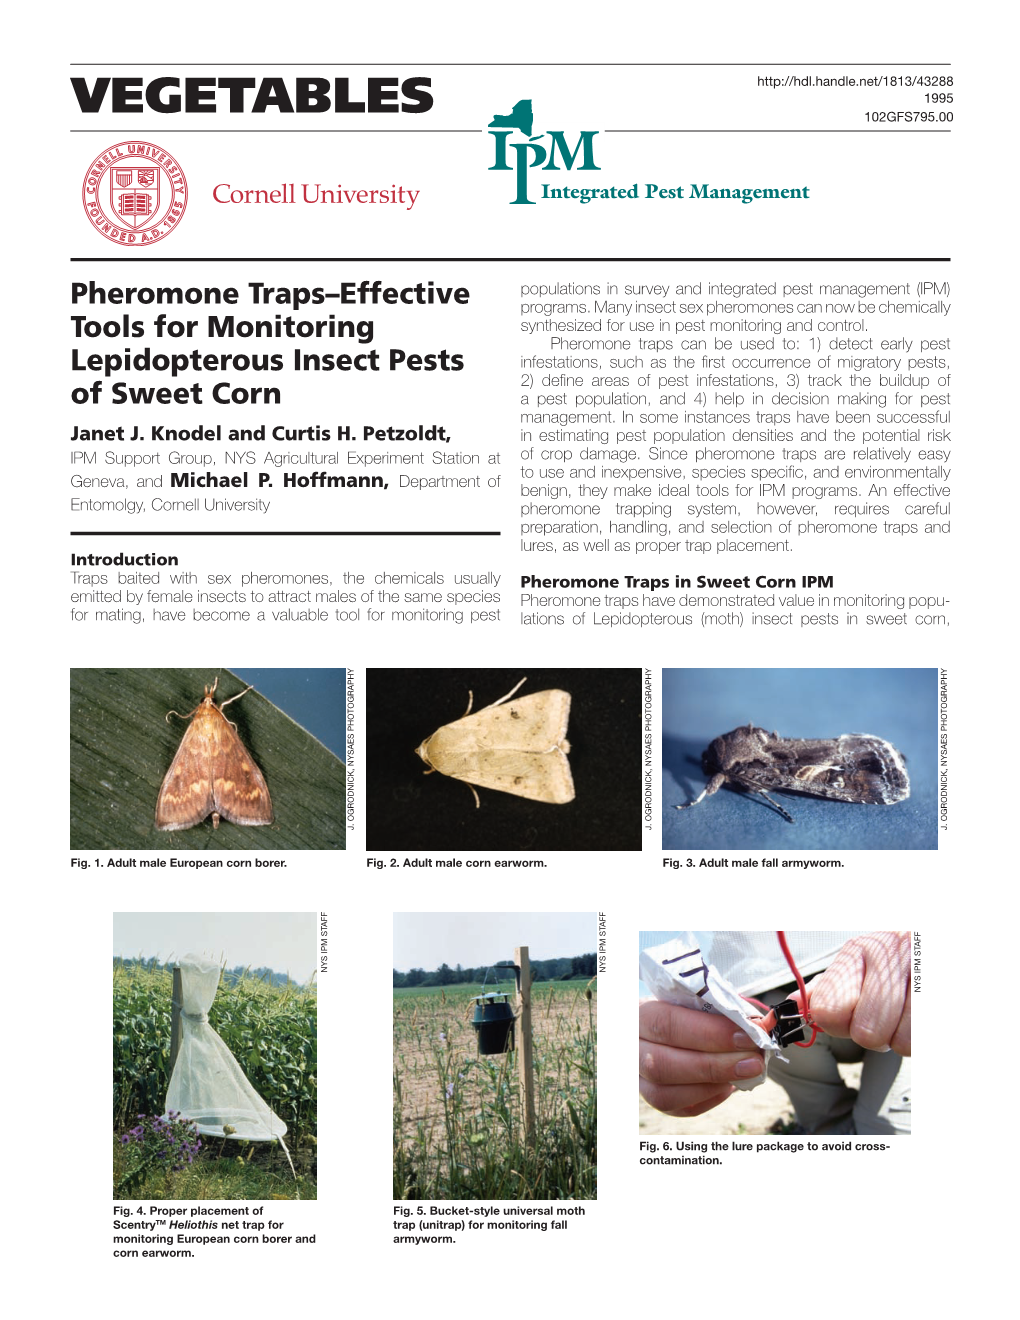 Pheromone Traps–Effective Tools for Monitoring Lepidopterous Insect